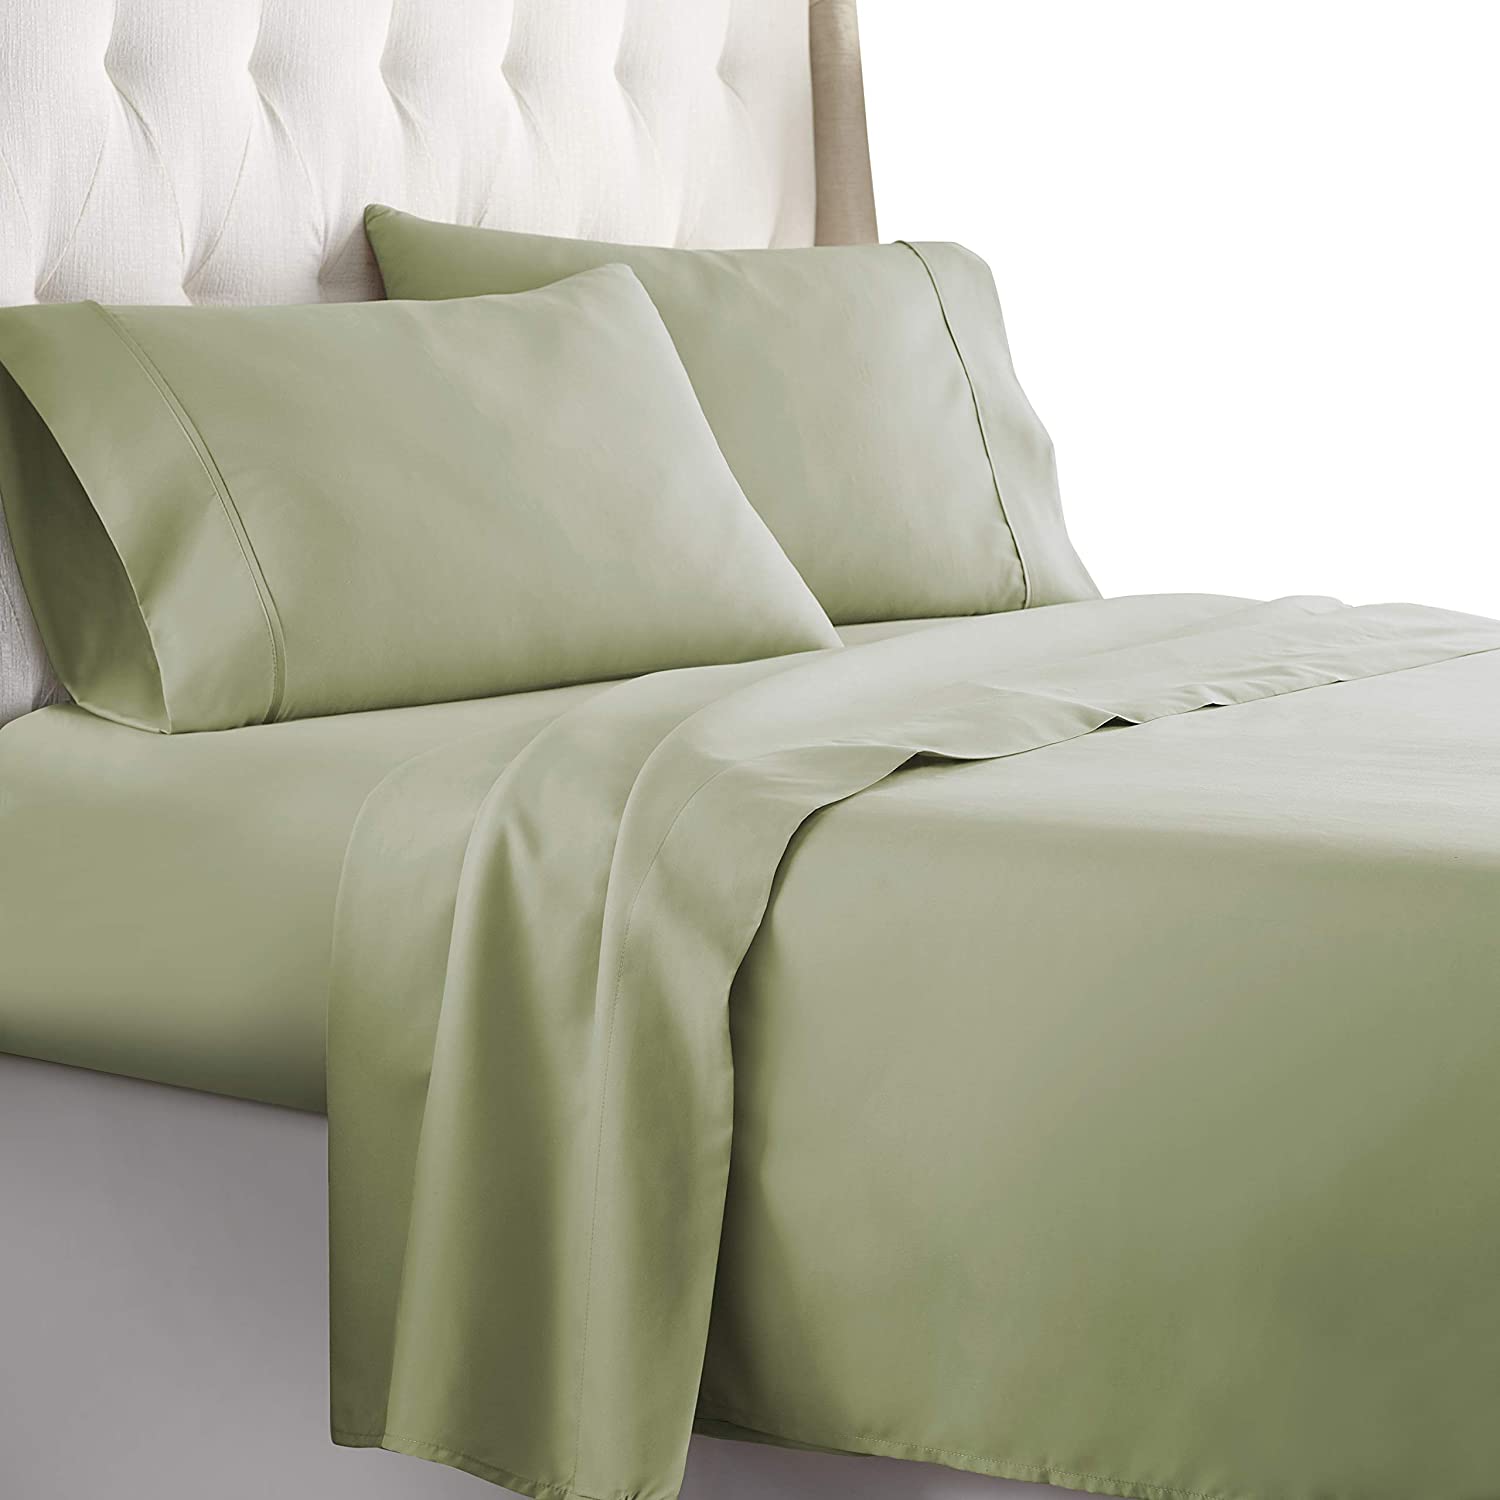 Details about   Hc Collection Bed Sheets Set Hotel Luxury 1800 Series Platinum Collection  